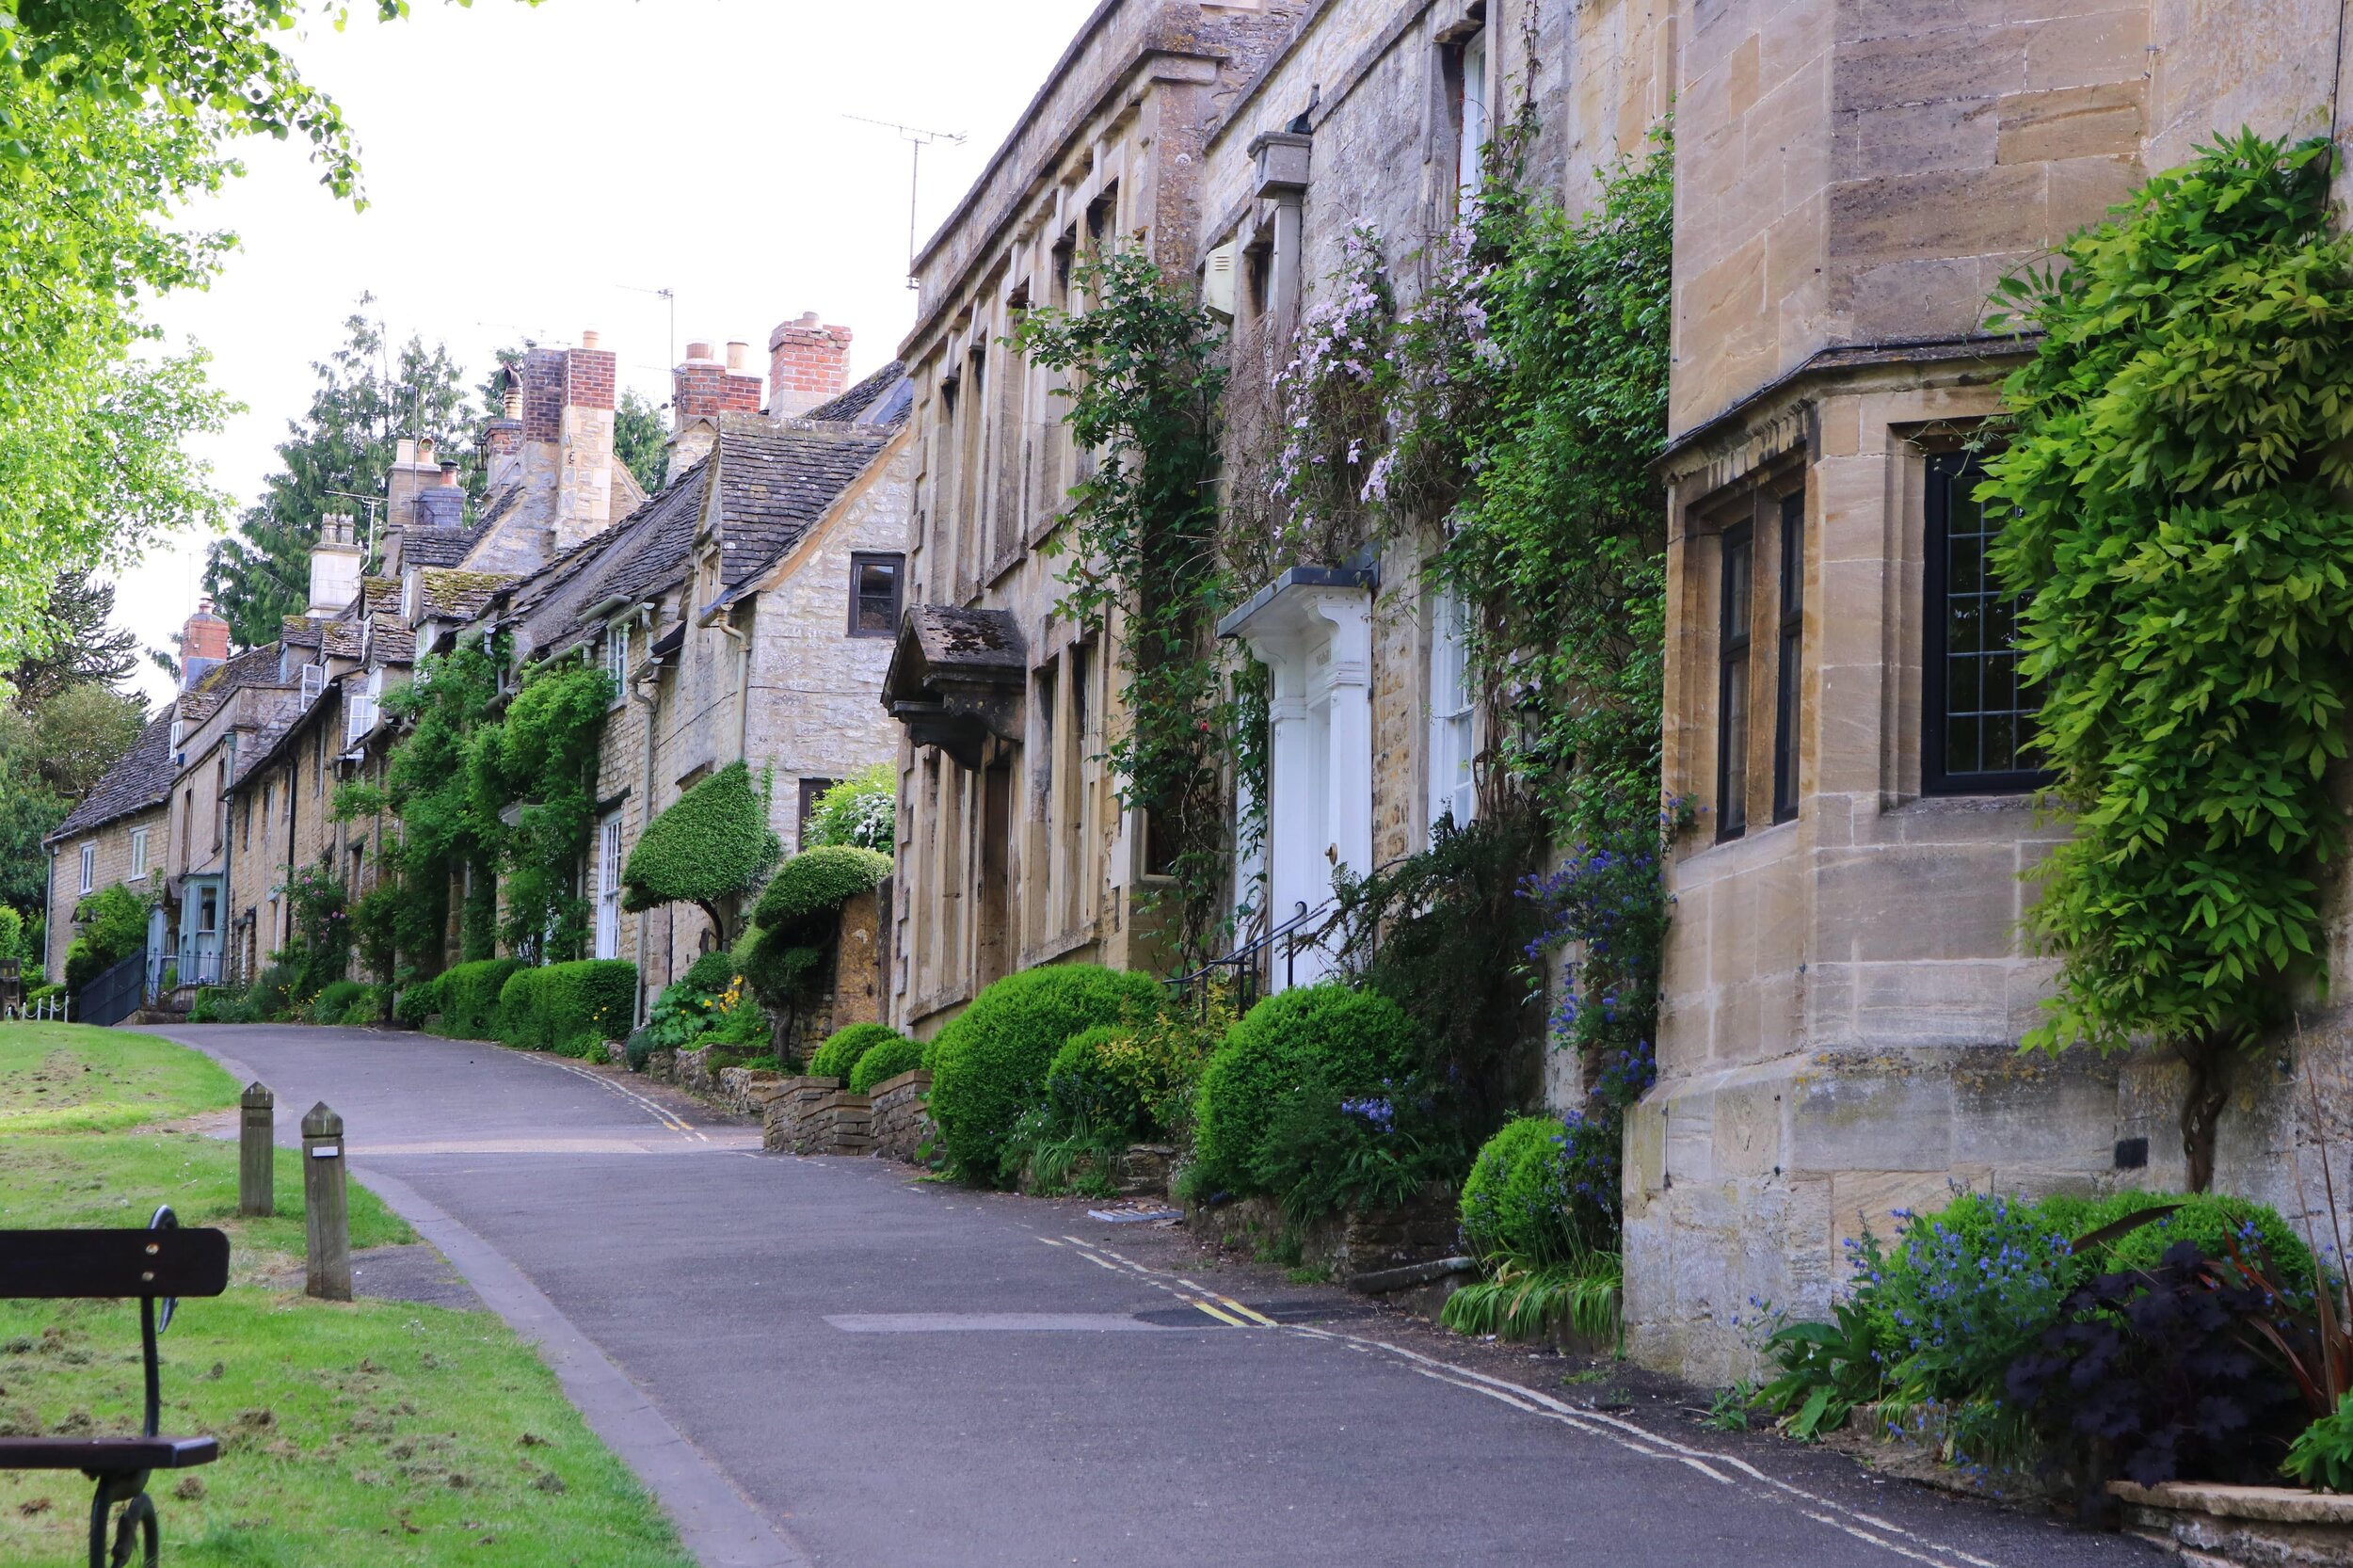 Looking uphill along a path lined with sand-coloured stone houses in the Cotswolds village of Burford with green leafy shrubs outside each front doot